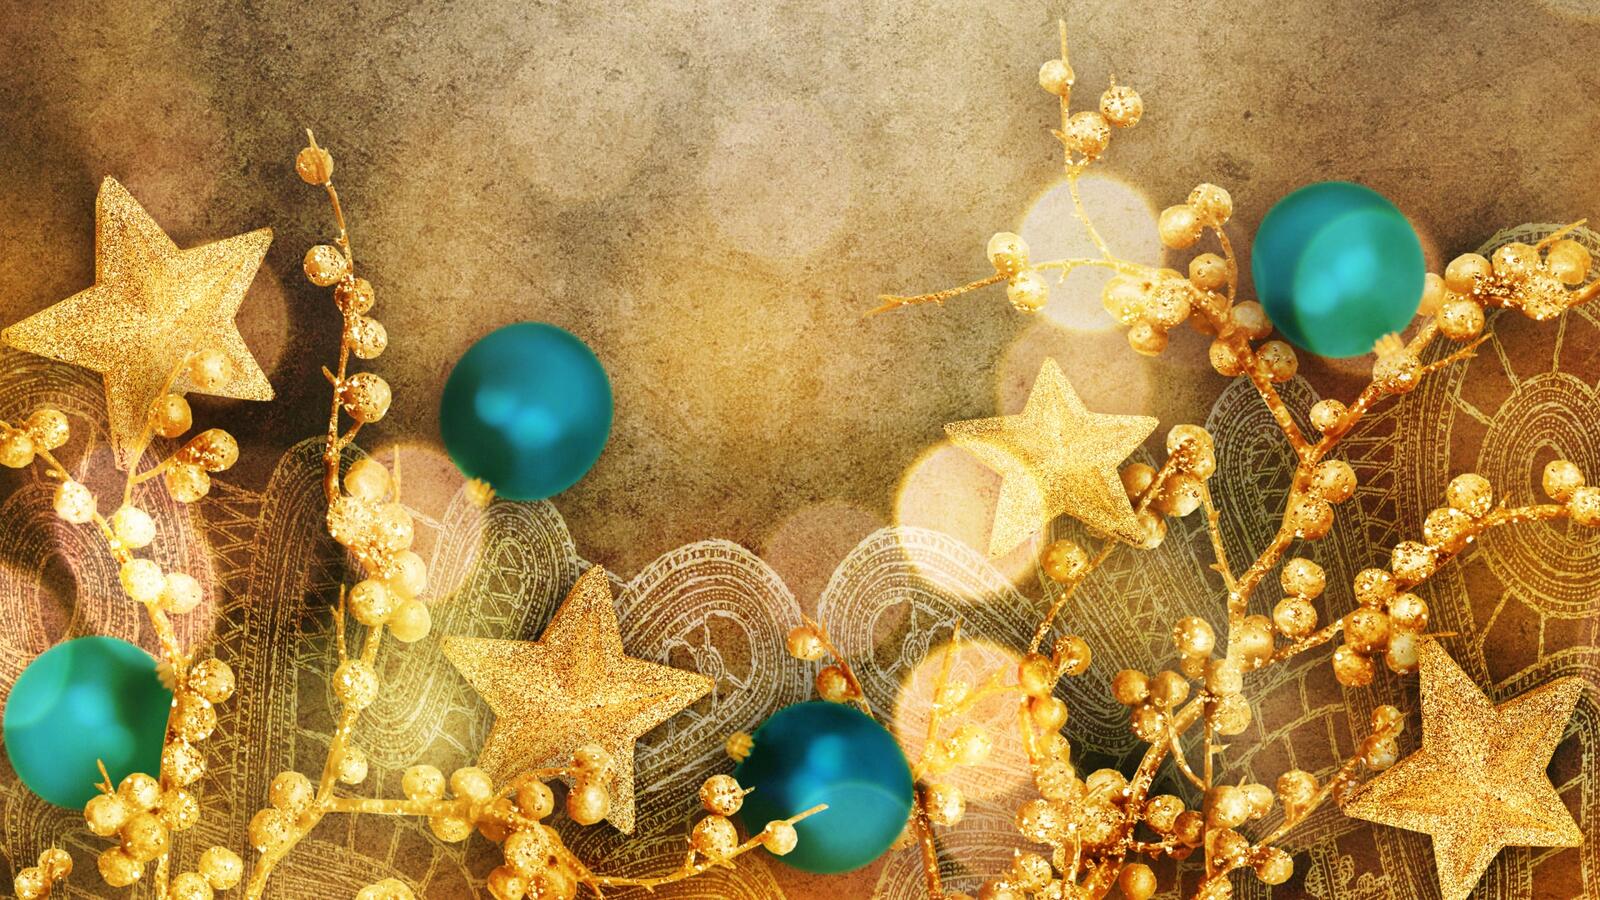 Wallpapers holiday decor toys on the desktop